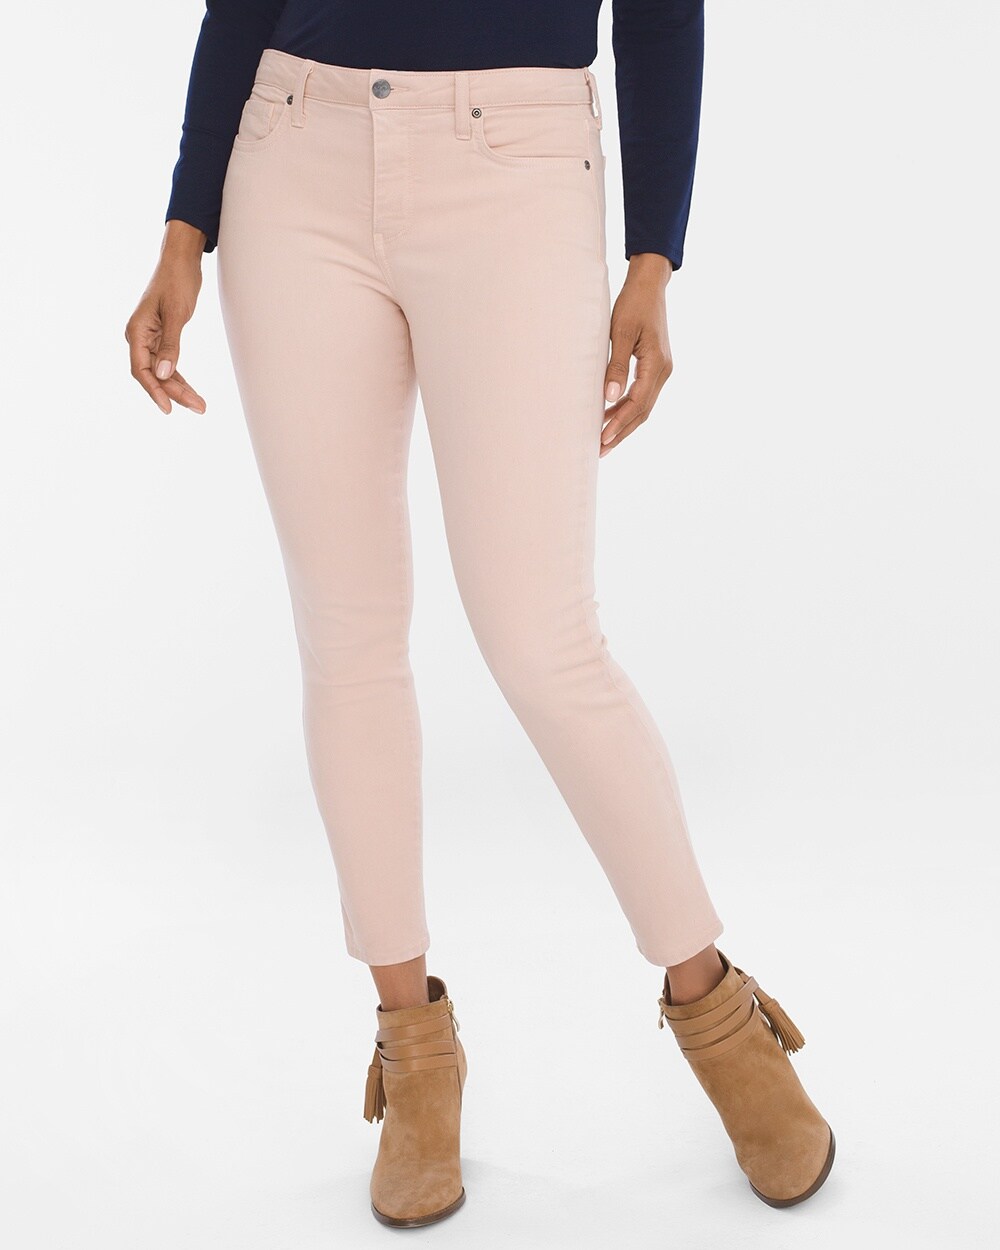 NYDJ Flawless Contour Skinny Ankle Jeans